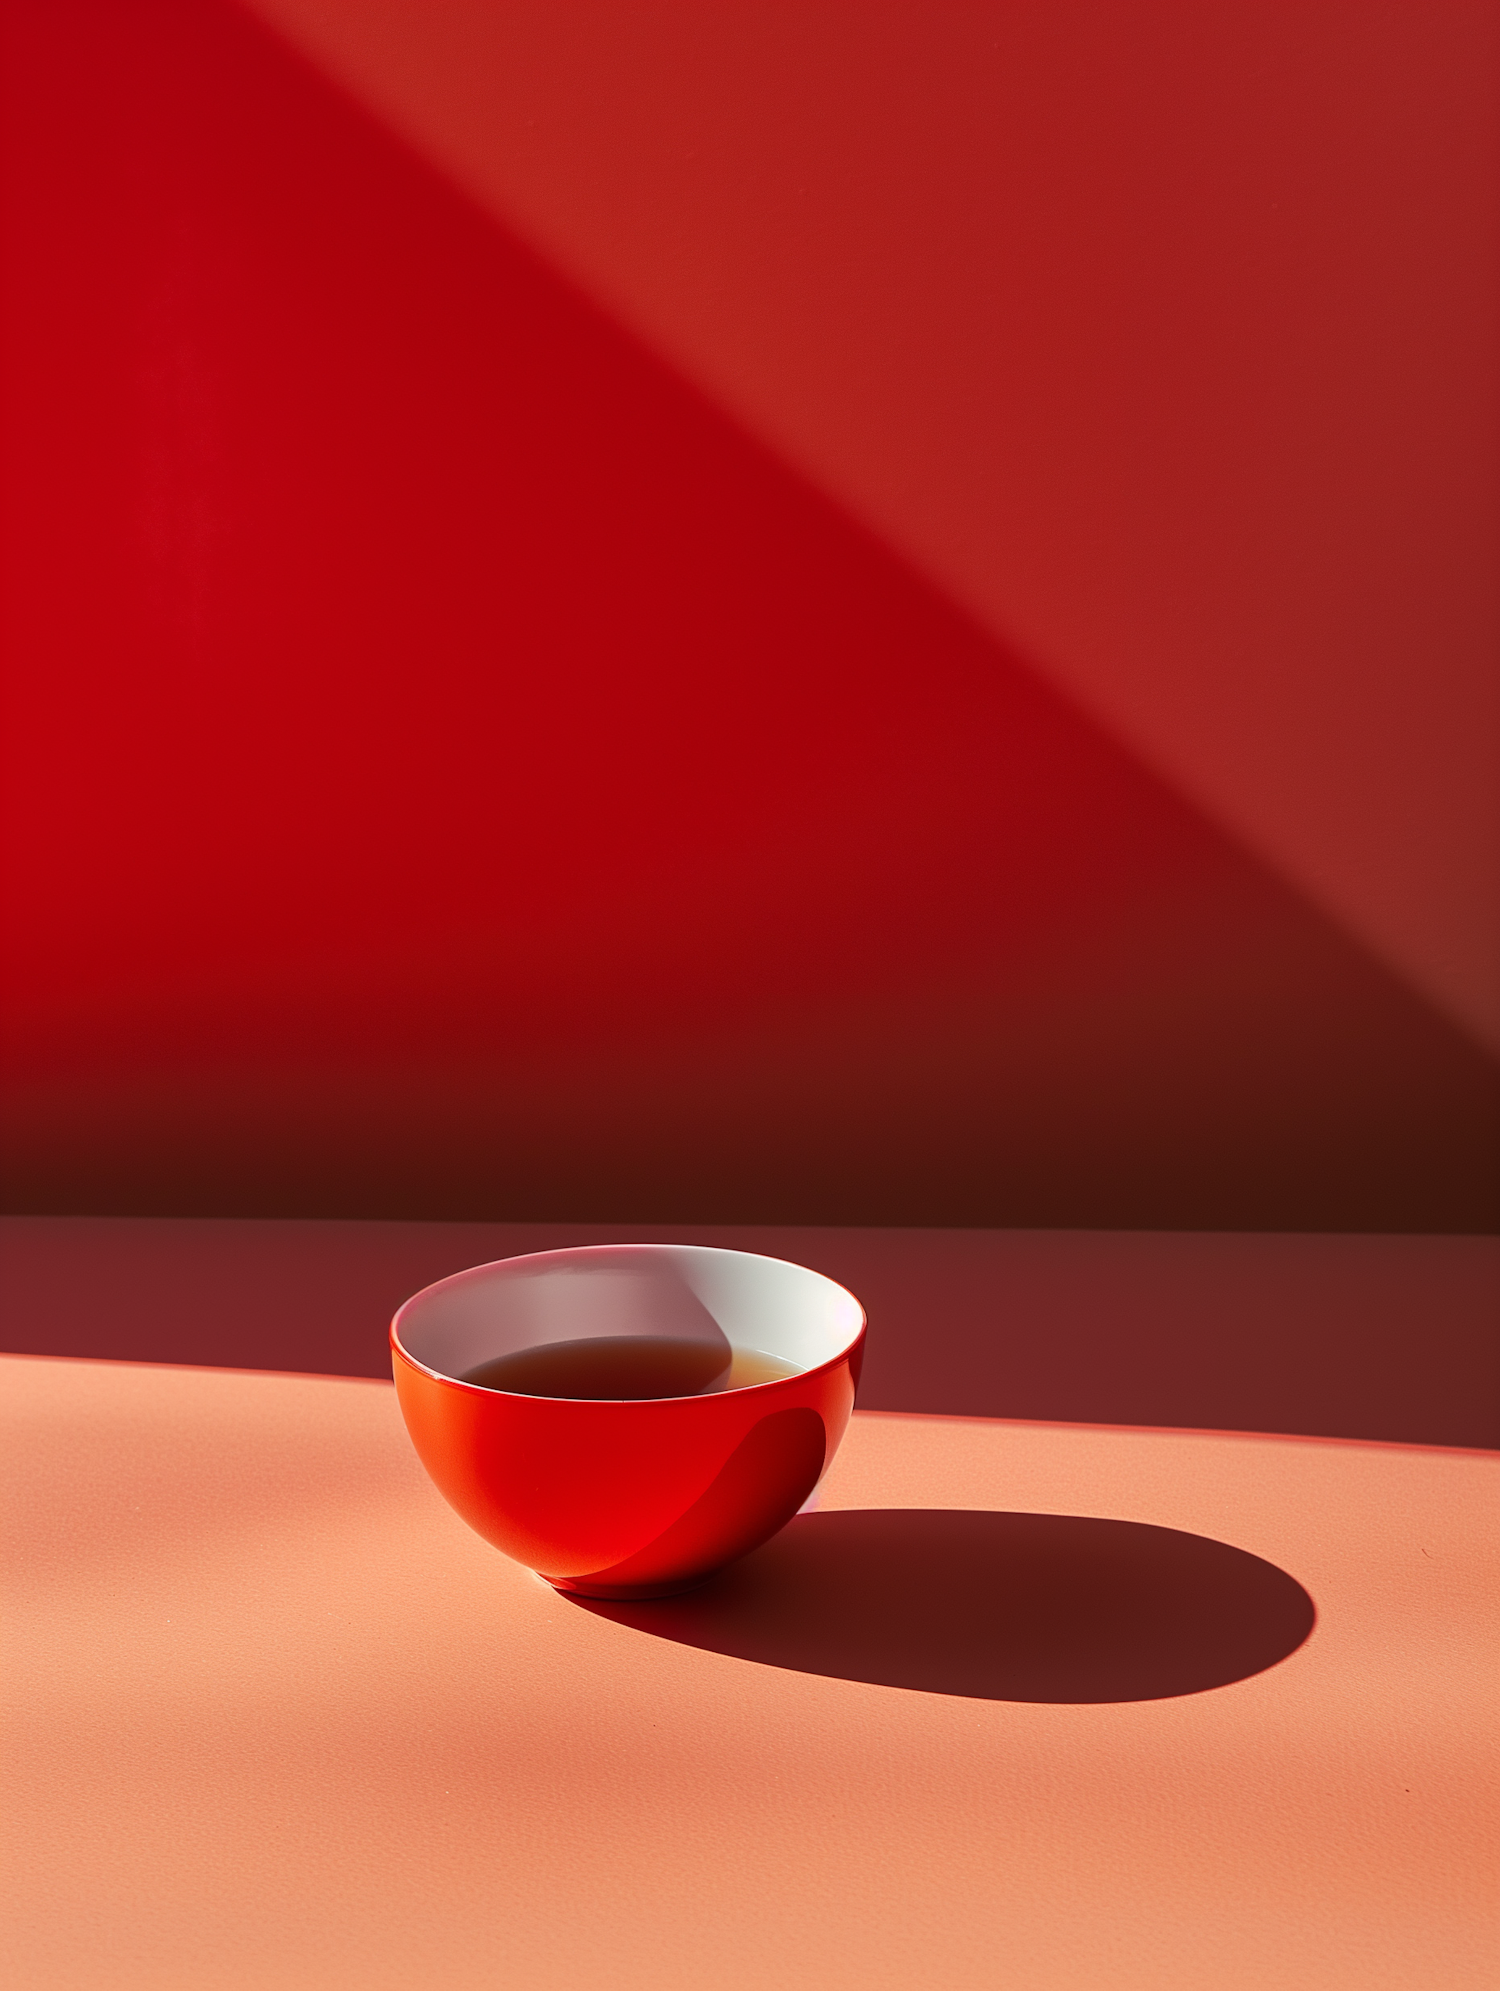 Minimalist Composition of Red and White Bowl